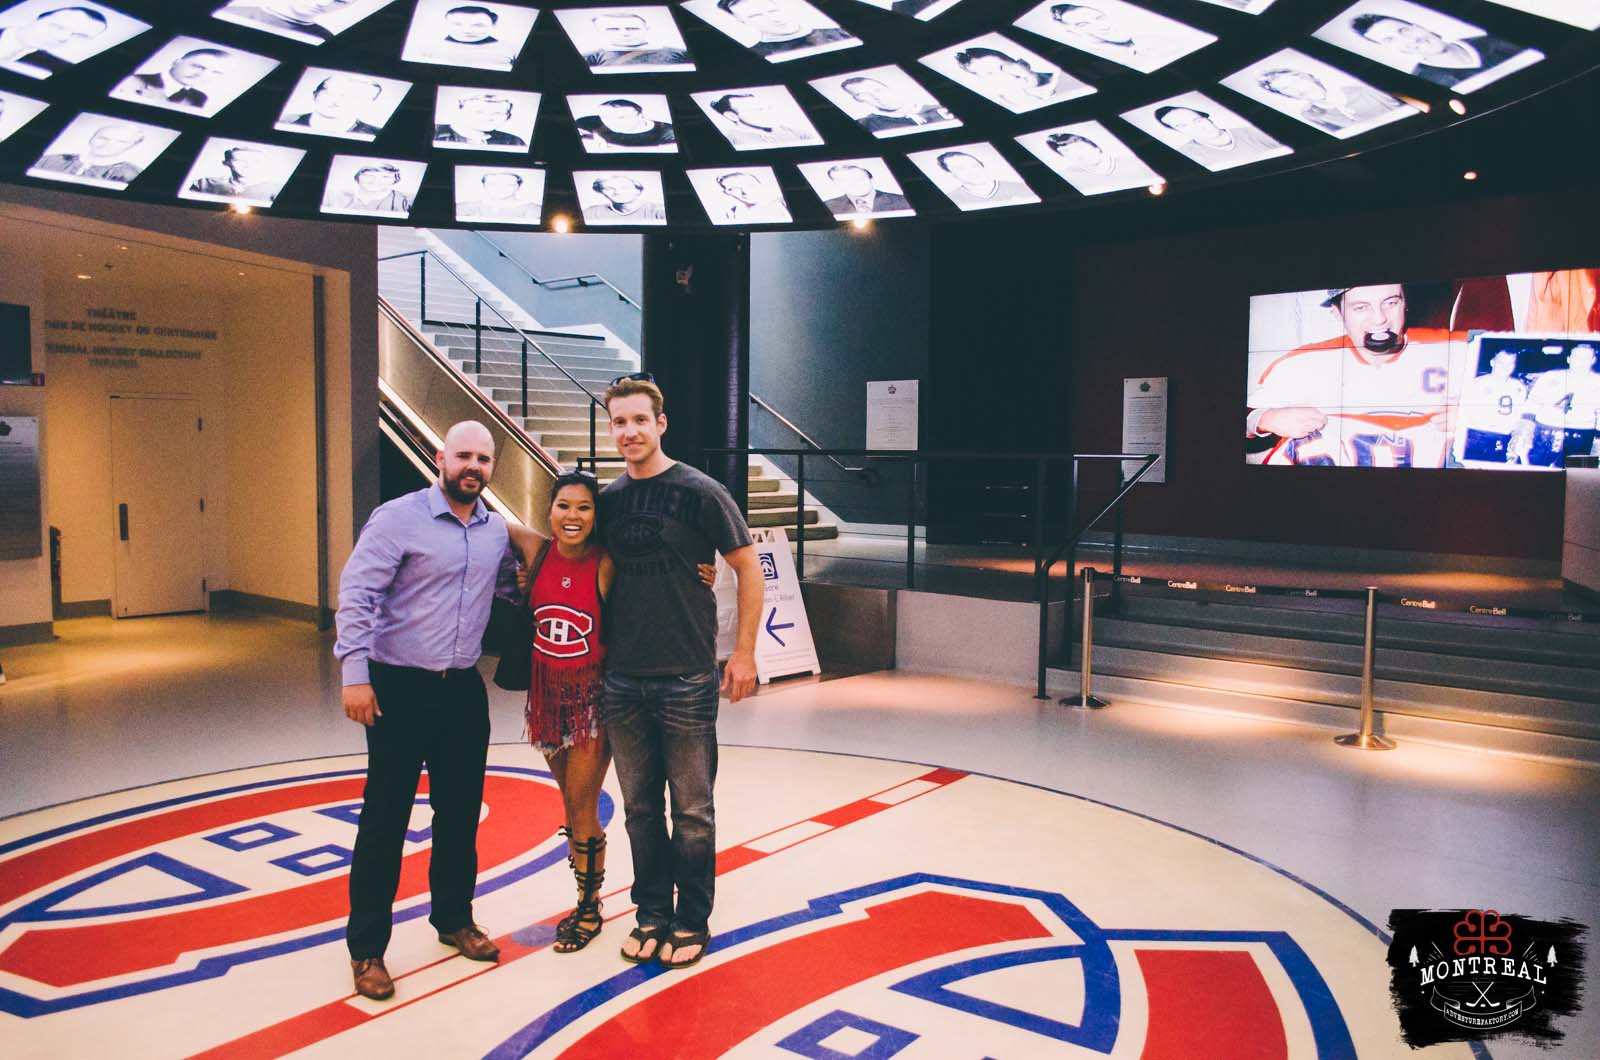 Thank you to the Habs organization, Jon & Jo and Alexandre to arrange us the last minute visit!